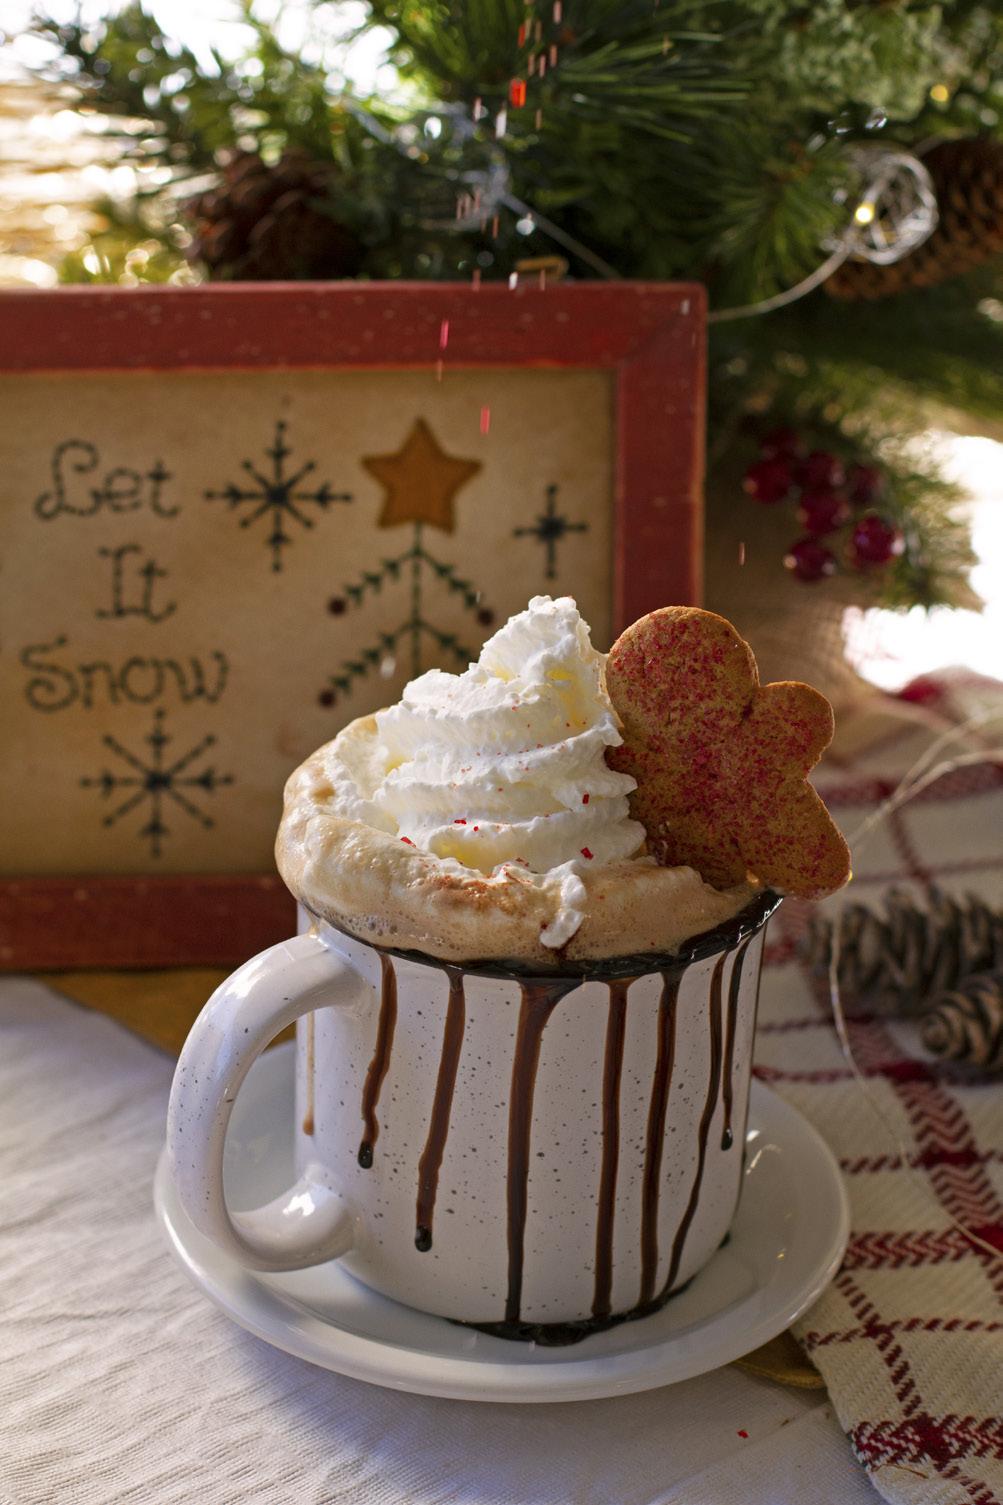 Chocolate Gingerbread Man This gingerbread hot chocolate is the perfect drink to warm you up this holiday season.